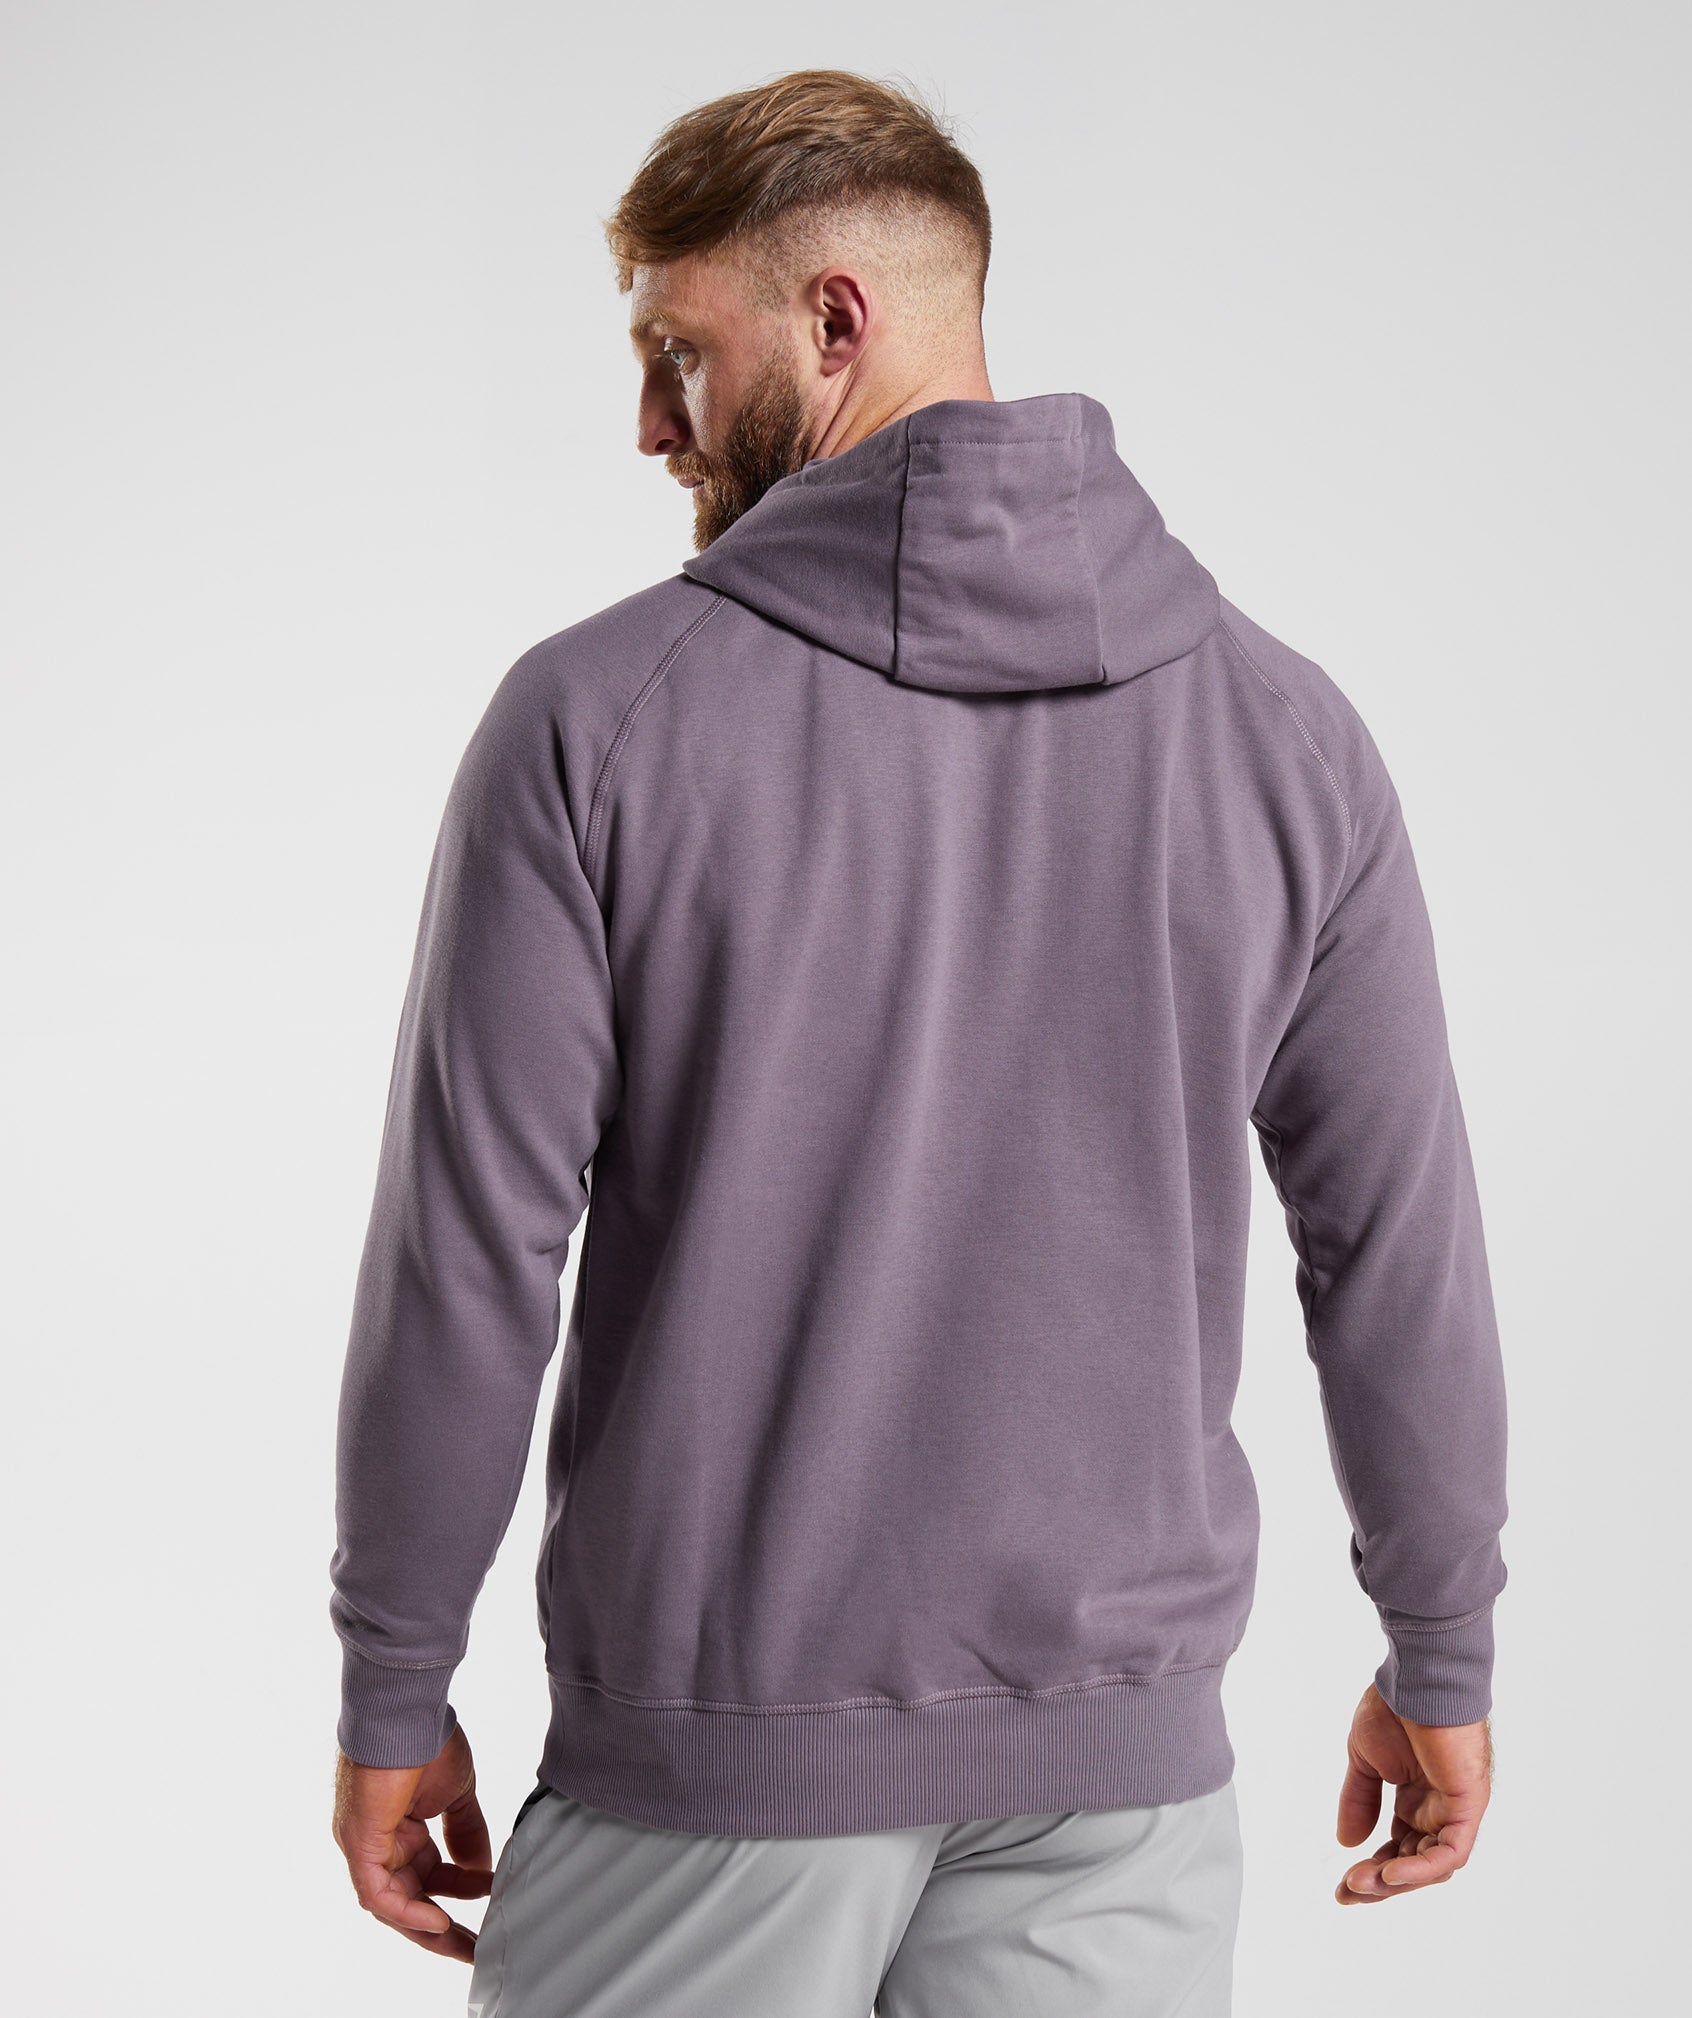 Apollo Hoodie in Musk Lilac - view 2